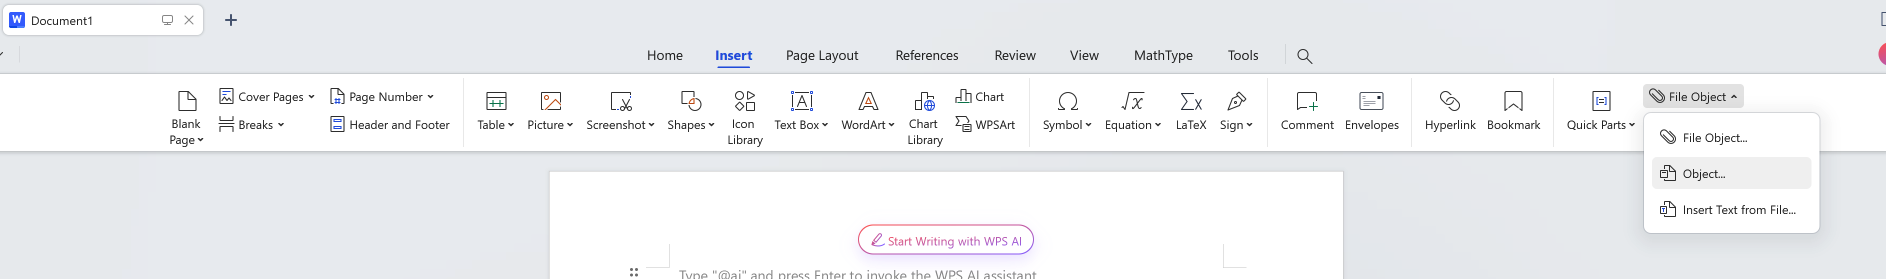 Insert tab in WPS Writer, with the File Object dropdown opened and the Object option clicked.